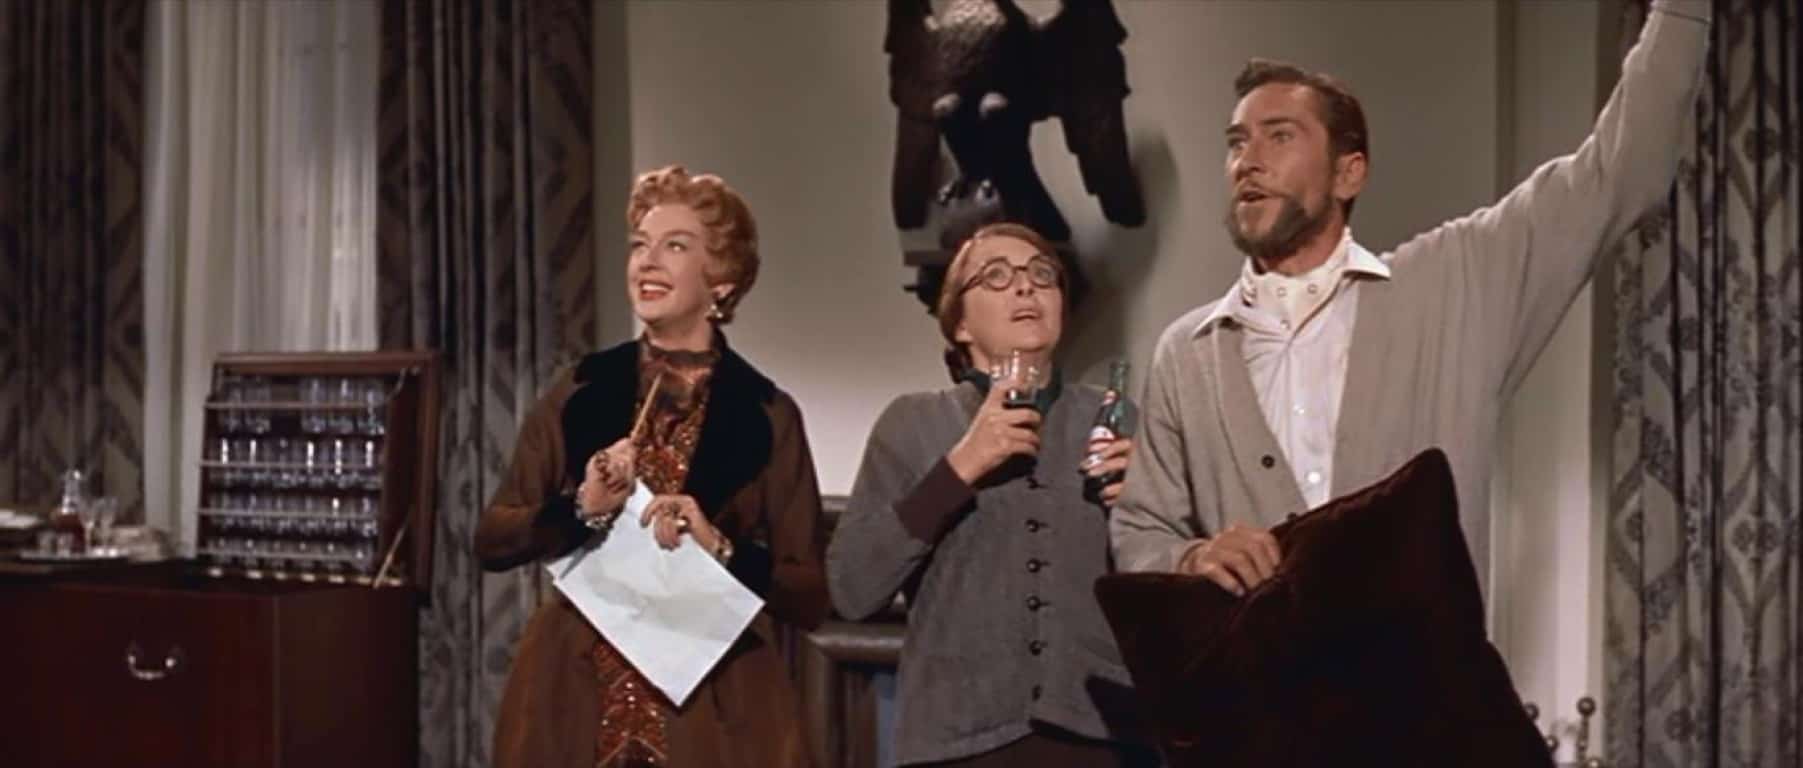 Auntie Mame (1958) | Peggy Cass, Robin Hughes, and Rosalind Russell in Auntie Mame (1958)